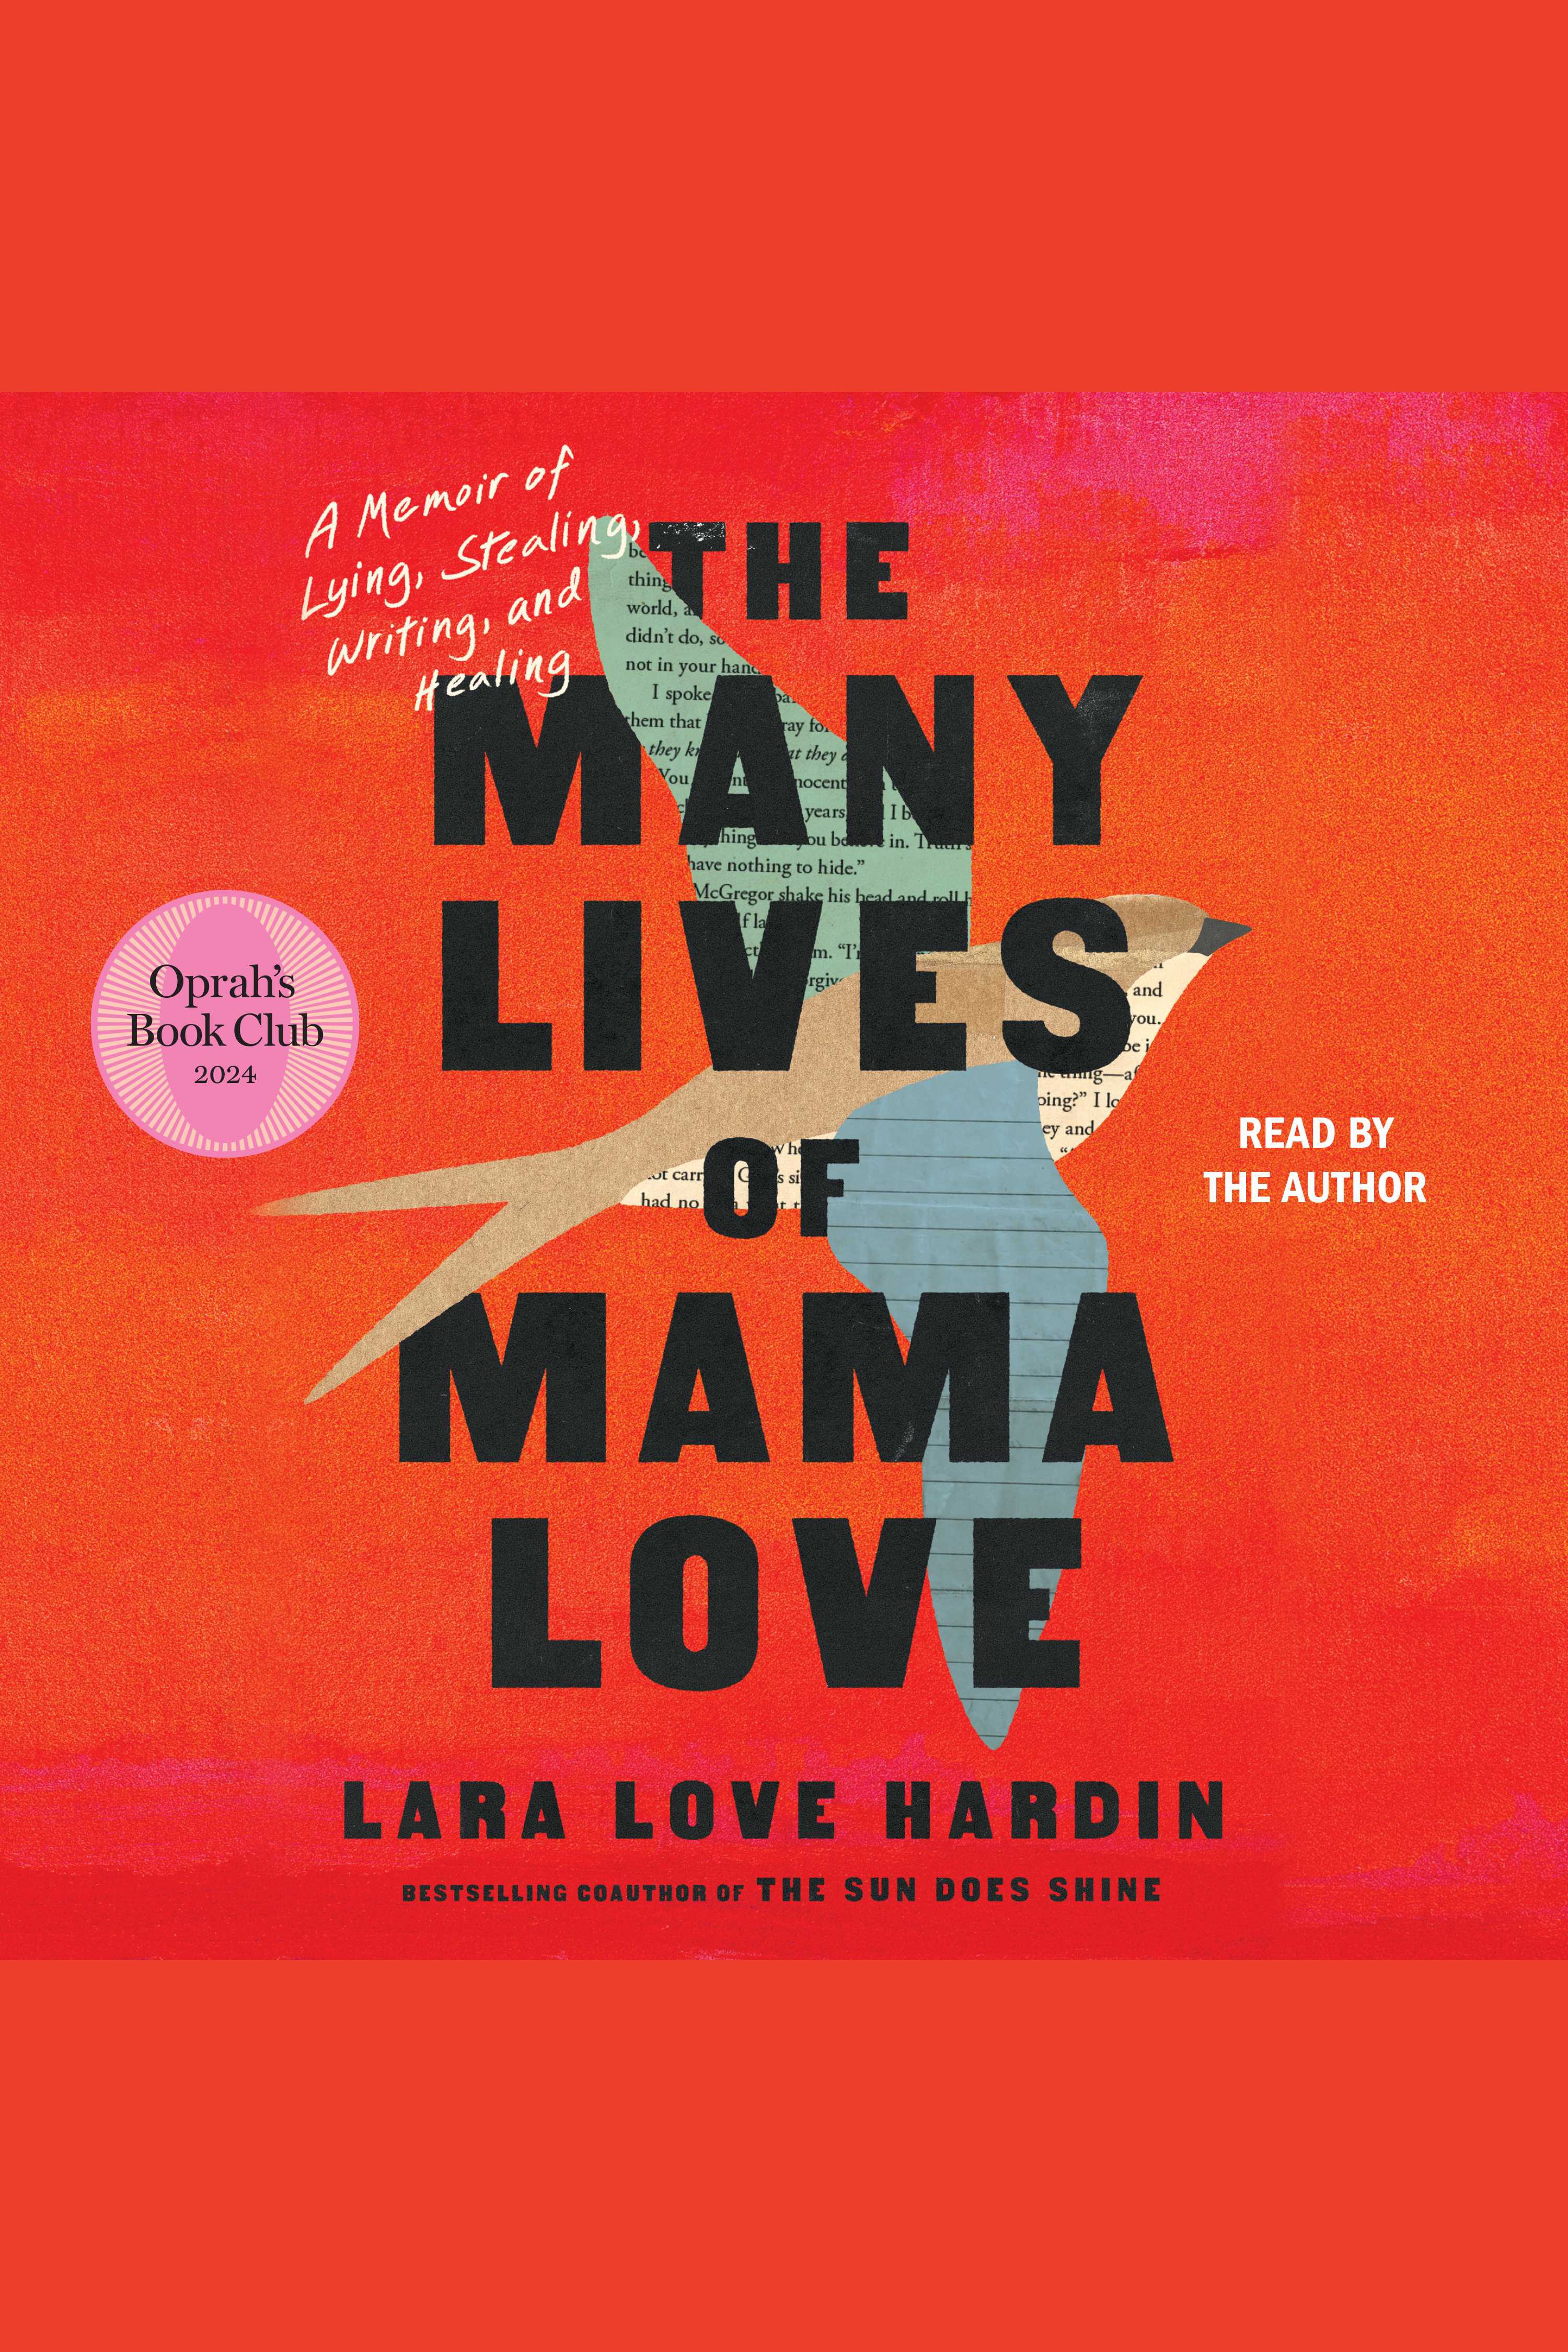 Image de couverture de The Many Lives of Mama Love [electronic resource] : A Memoir of Lying, Stealing, Writing, and Healing